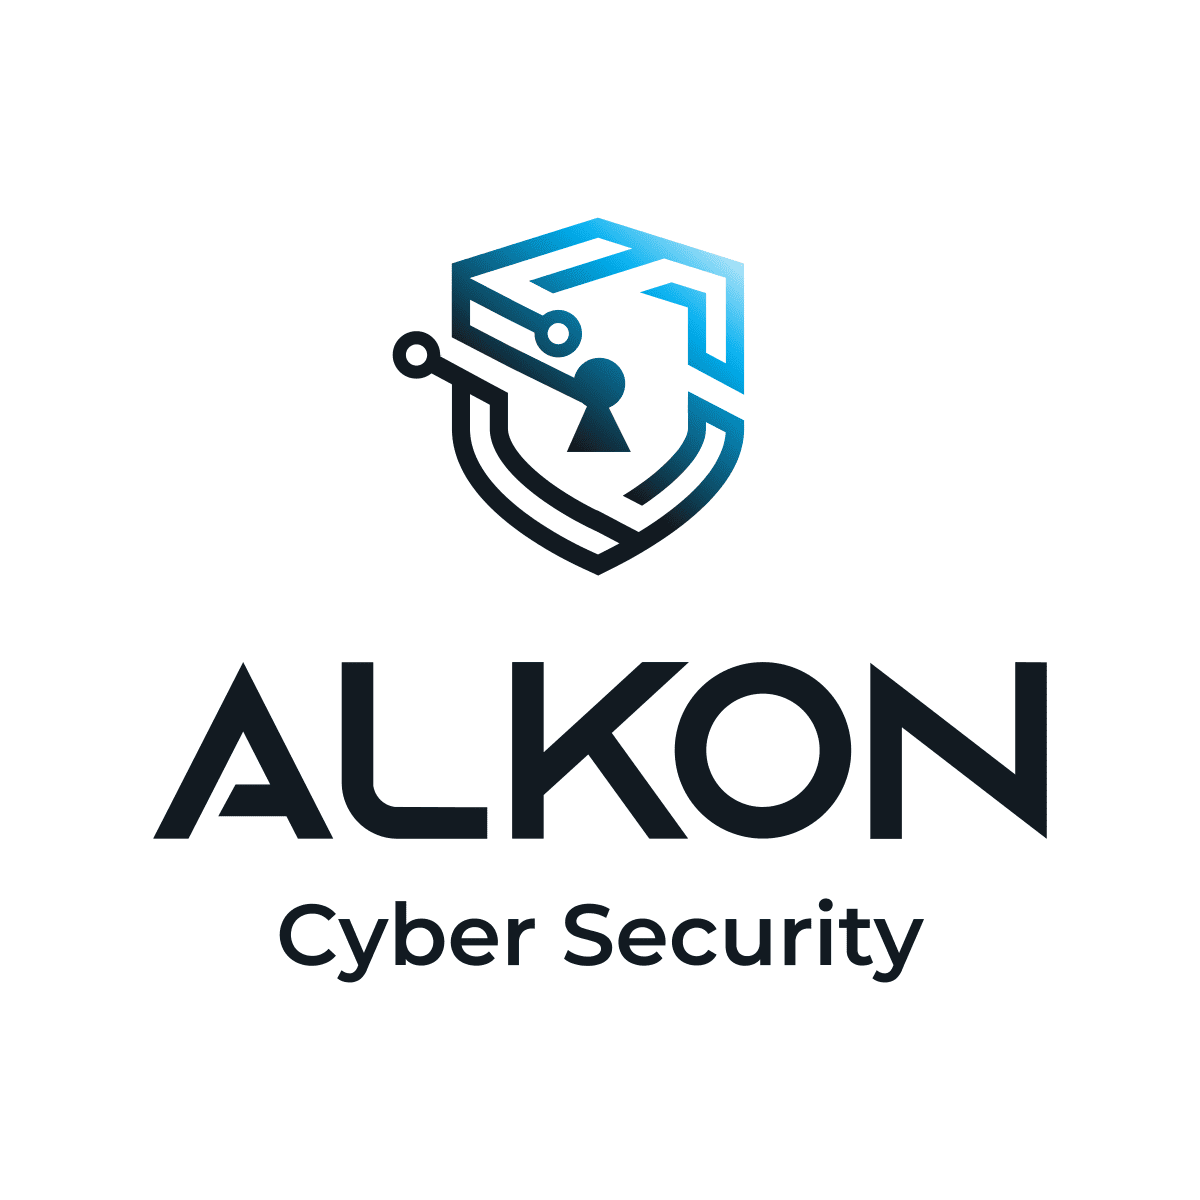 , Alkon Cyber Security to Help Australian Businesses Protect Their Information With Critical Security Recommendations